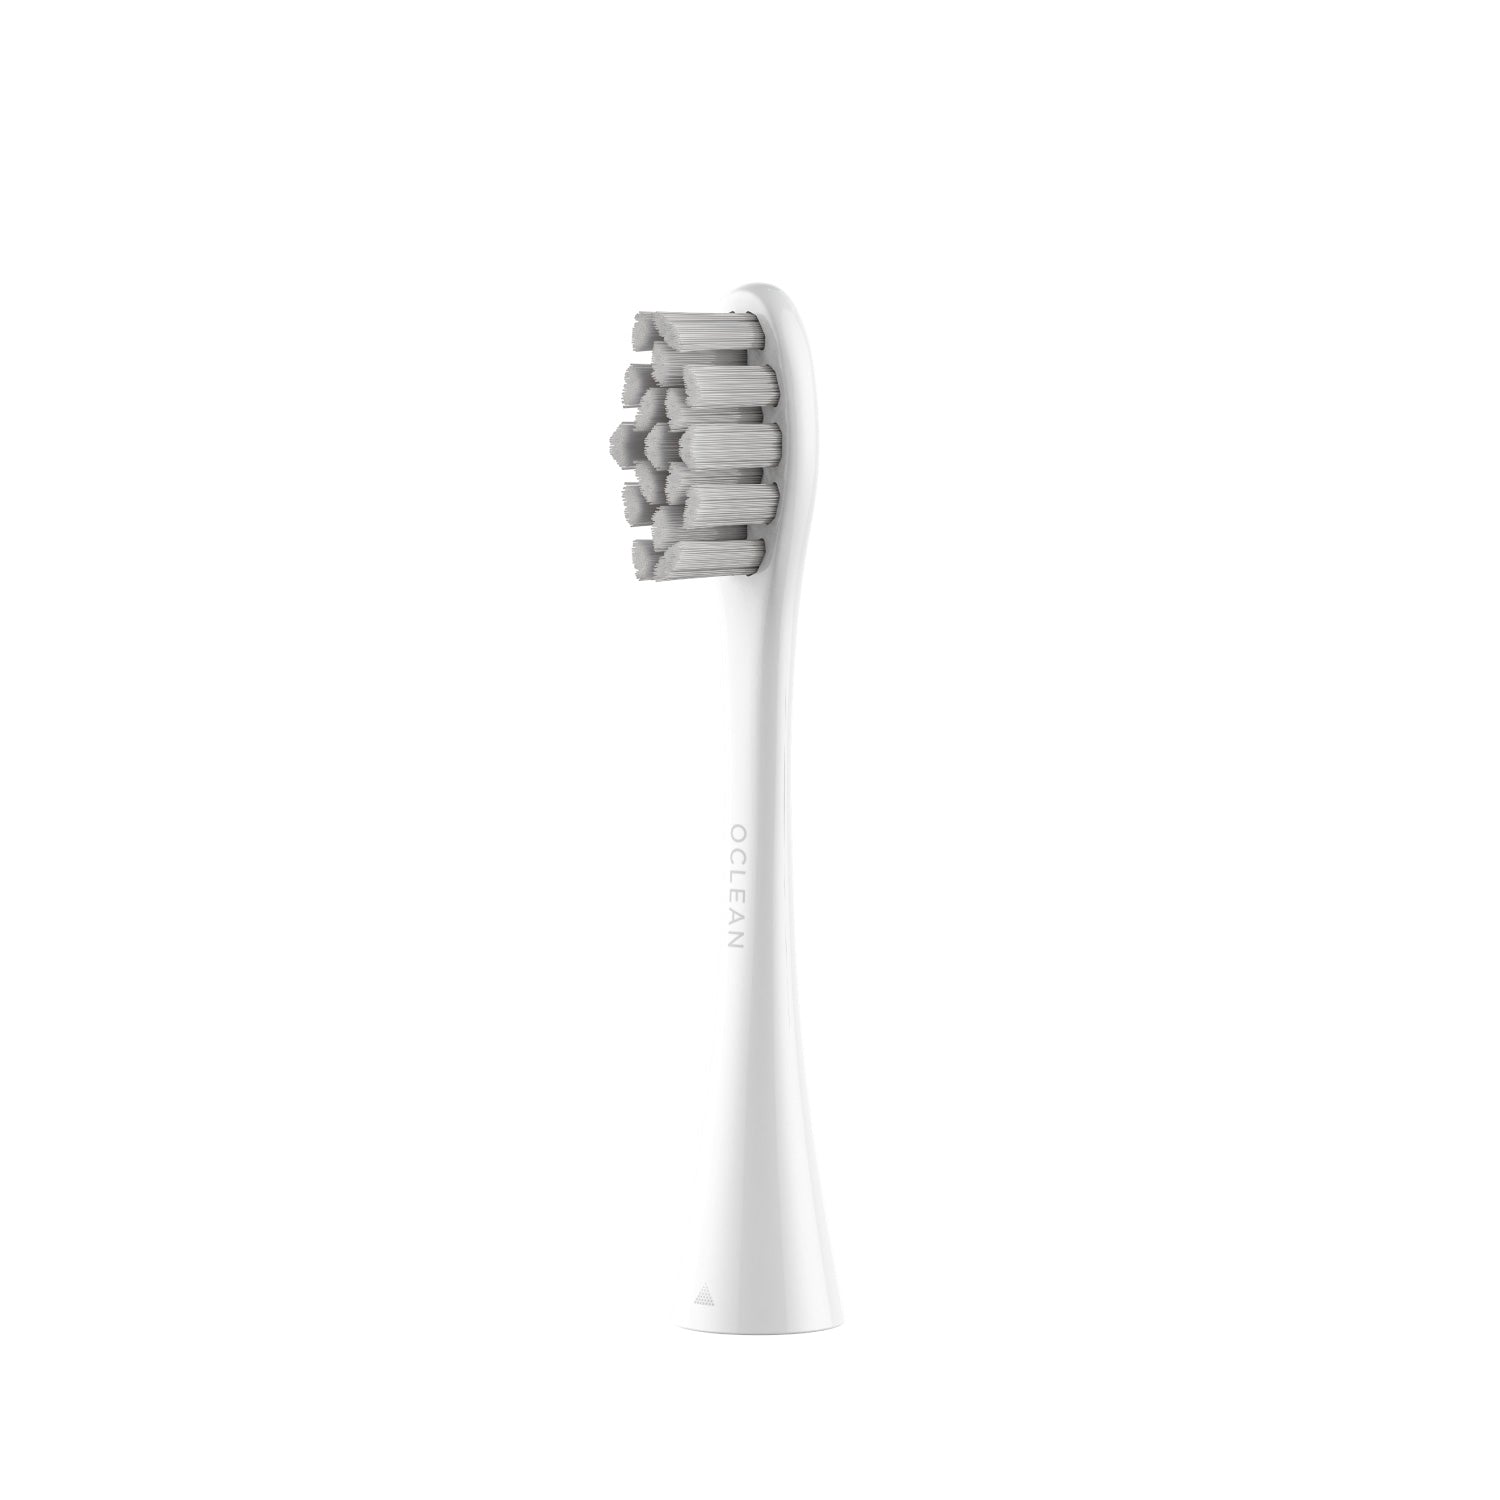 Oclean Brush Heads Refills Toothbrush Replacement Heads Daily Clean P2S6 Oclean US Store